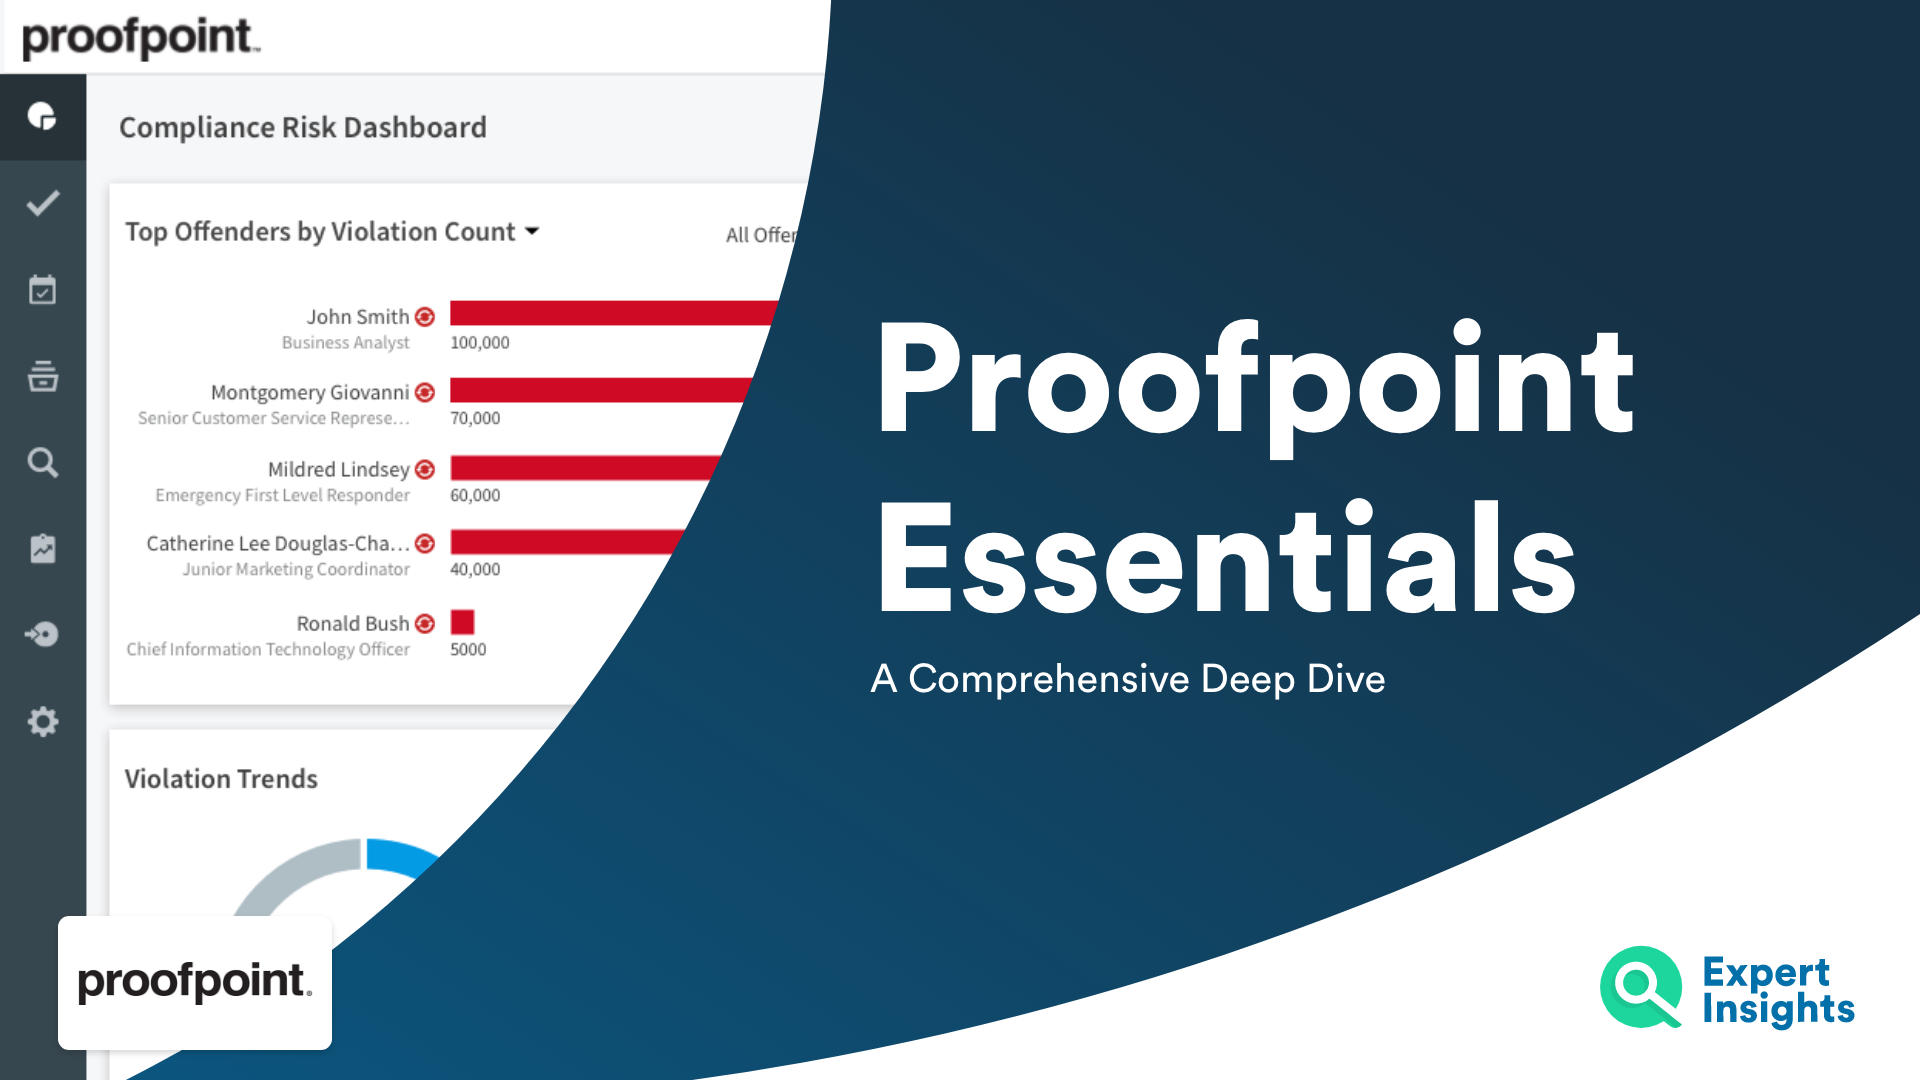 Proofpoint Essentials Overview